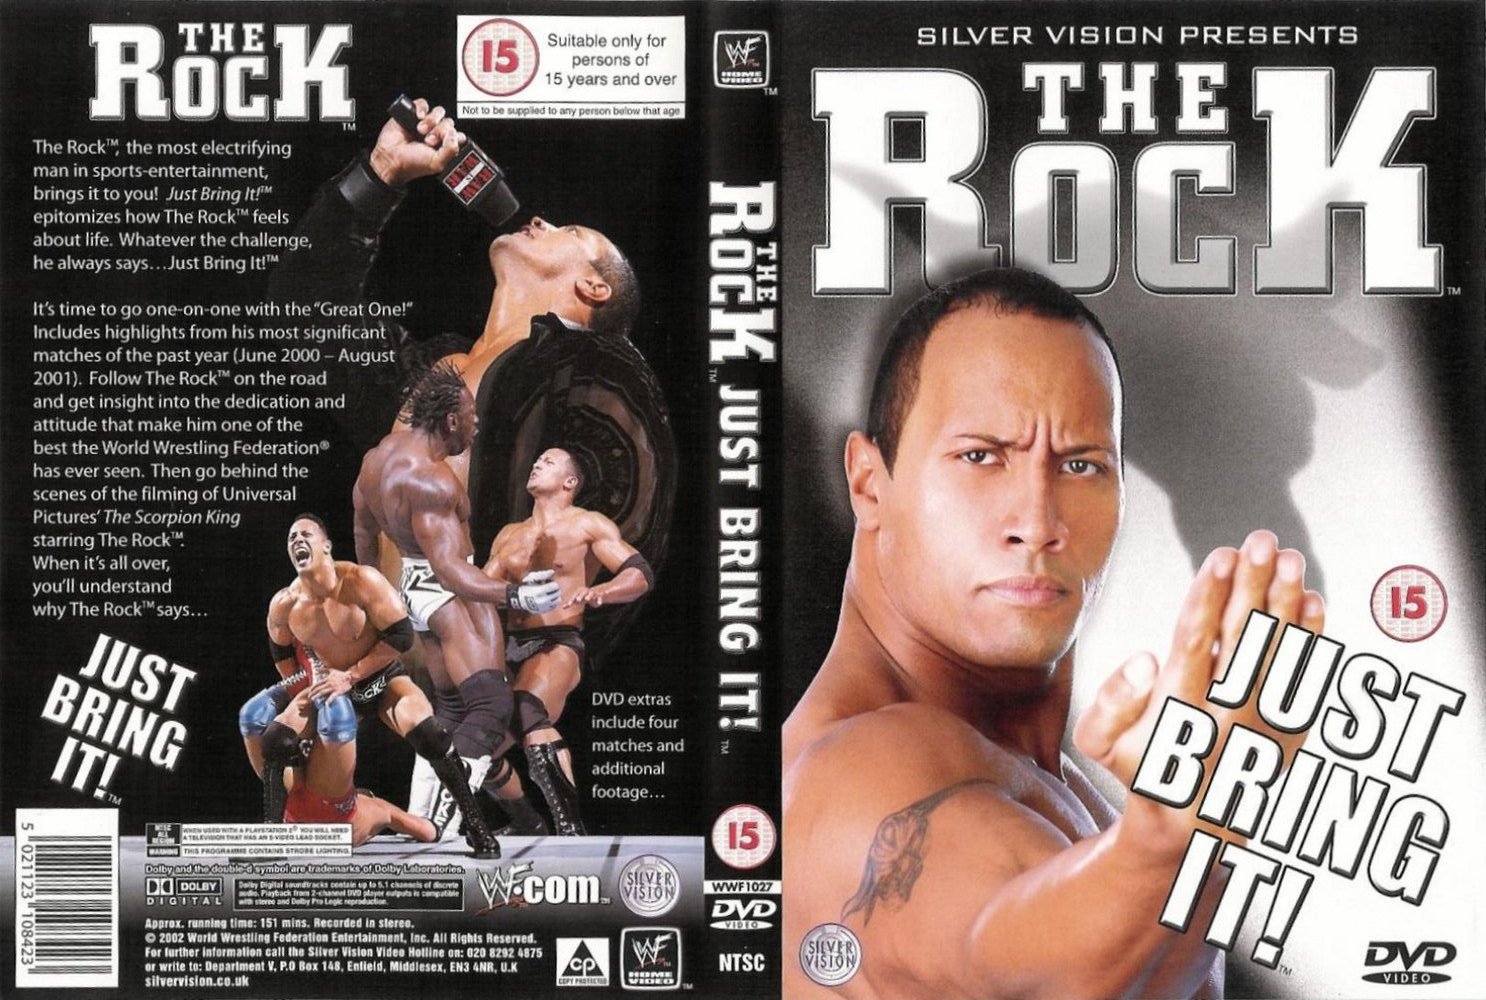 Jaquette DVD Wwe The Rock Just Bring It